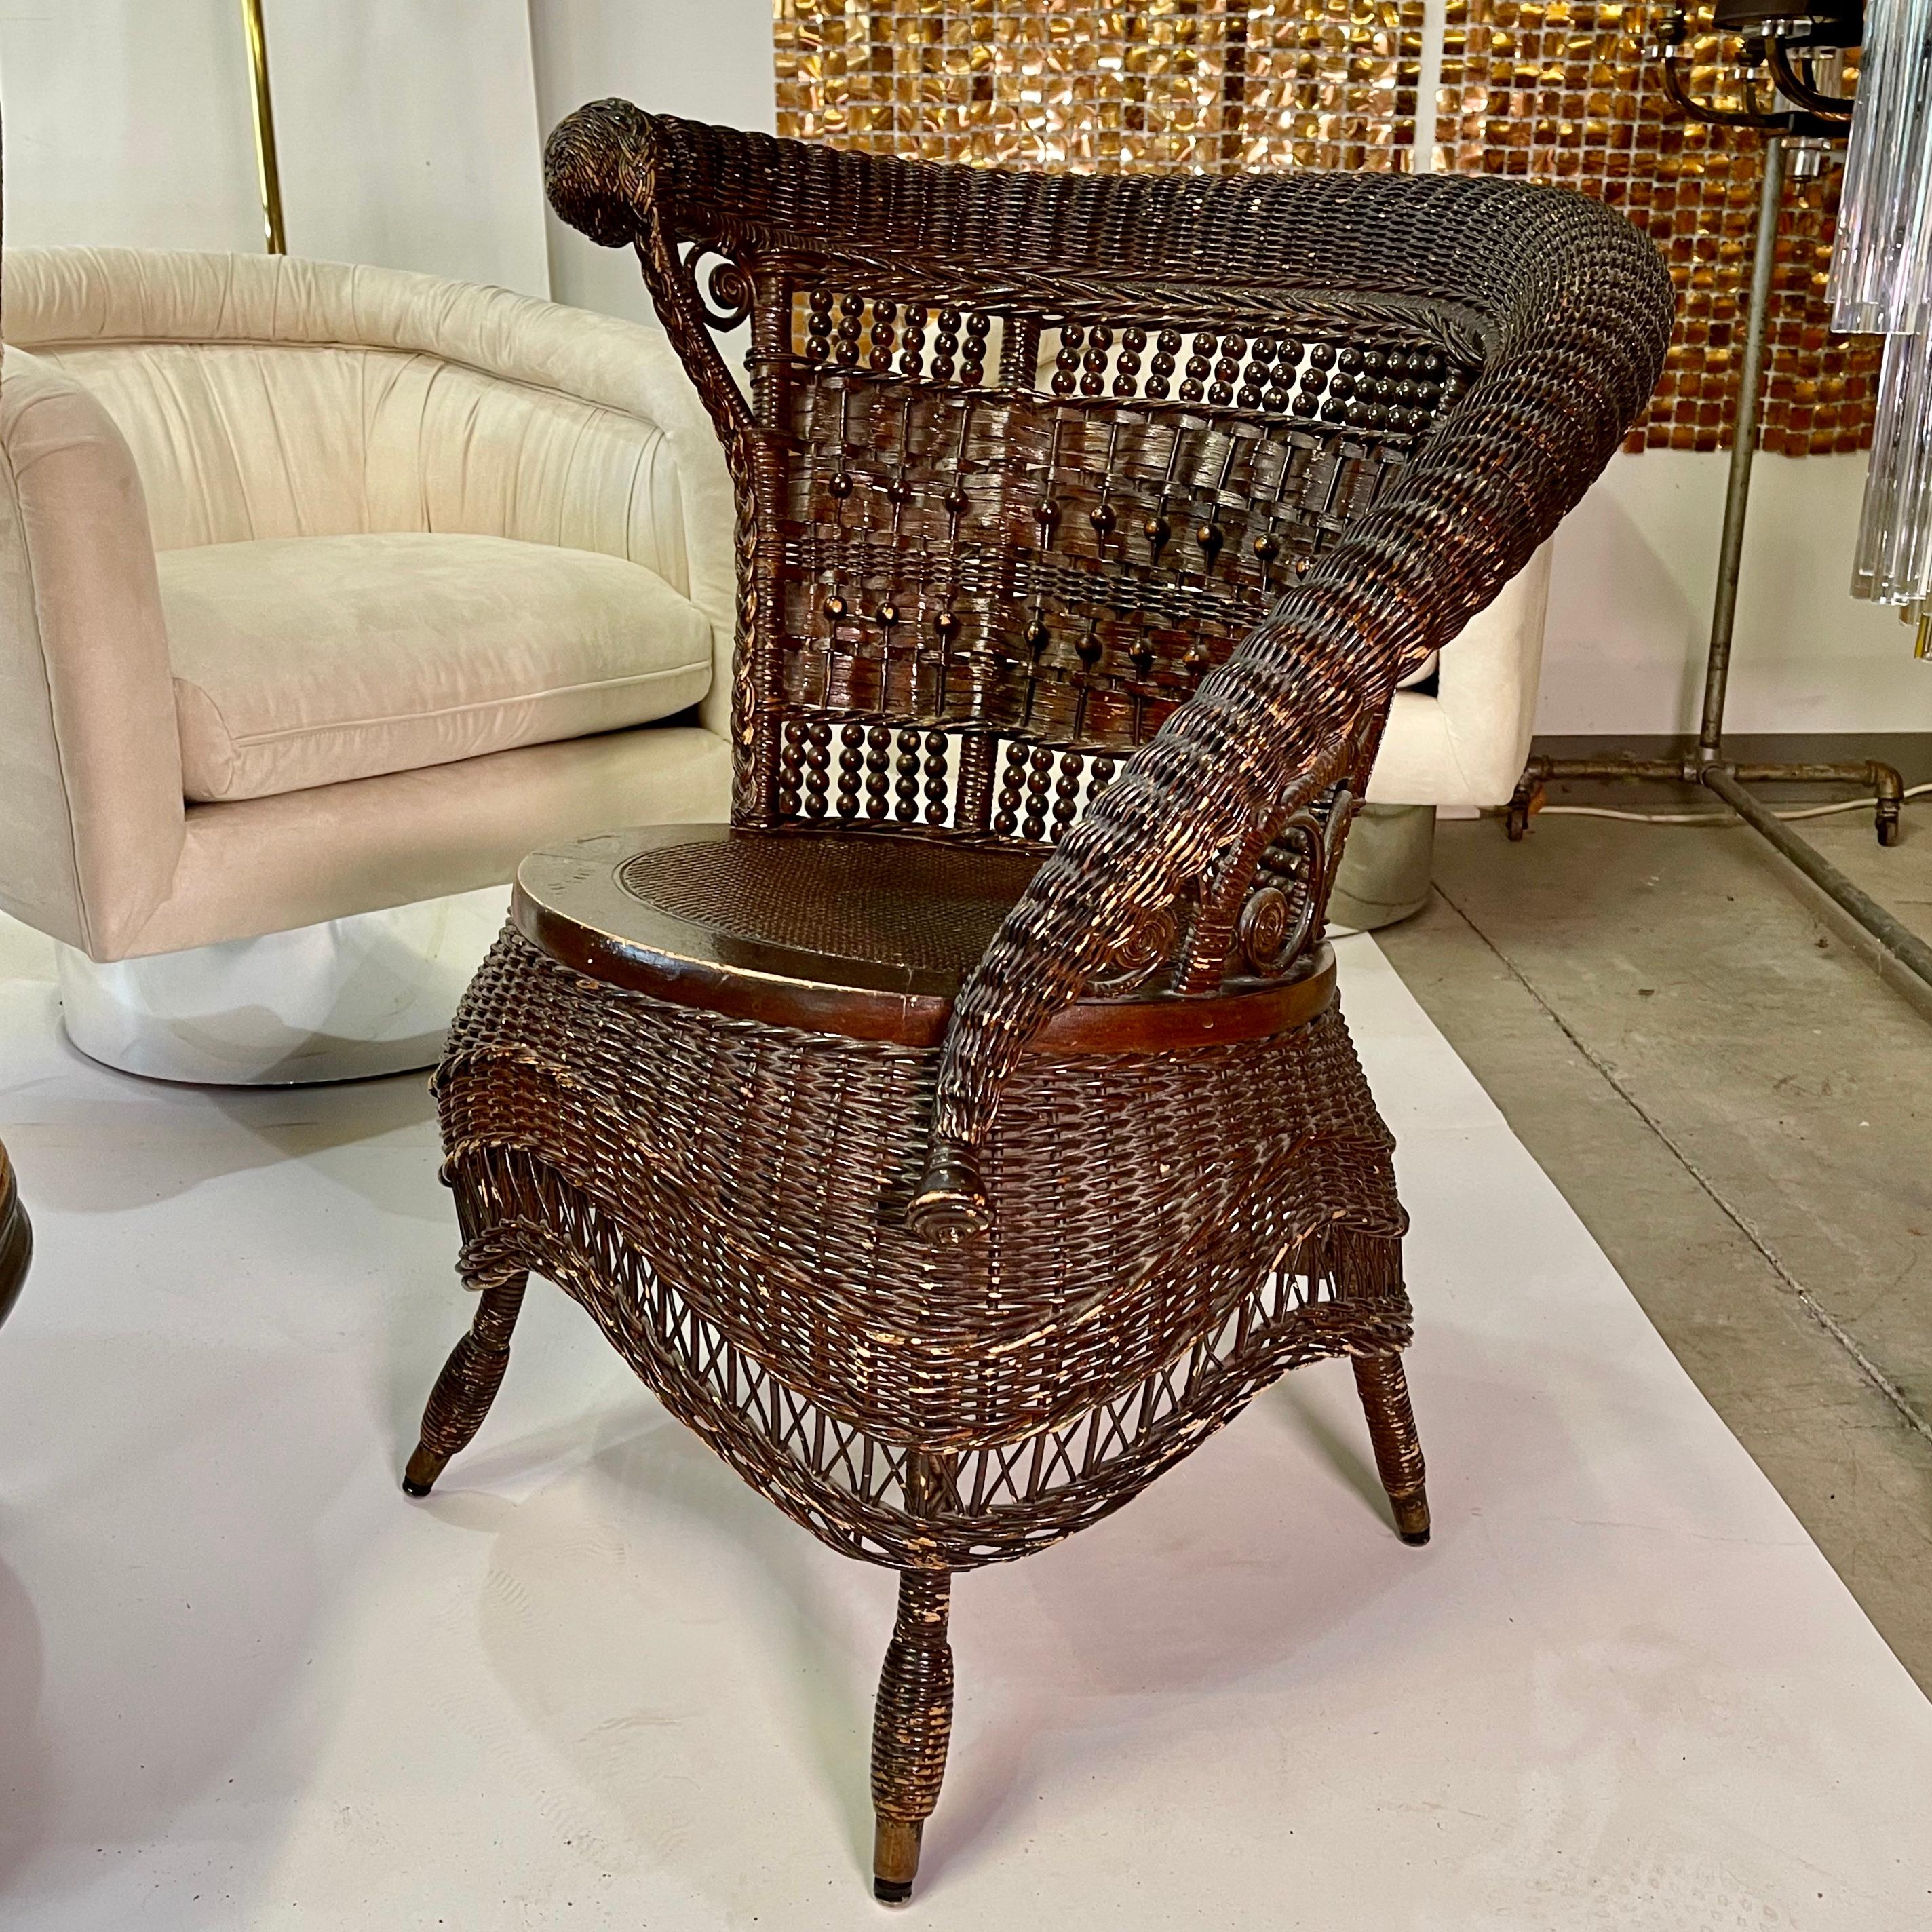 20th Century Jenkins & Phipps Stick and Ball Wicker Portrait Chair For Sale